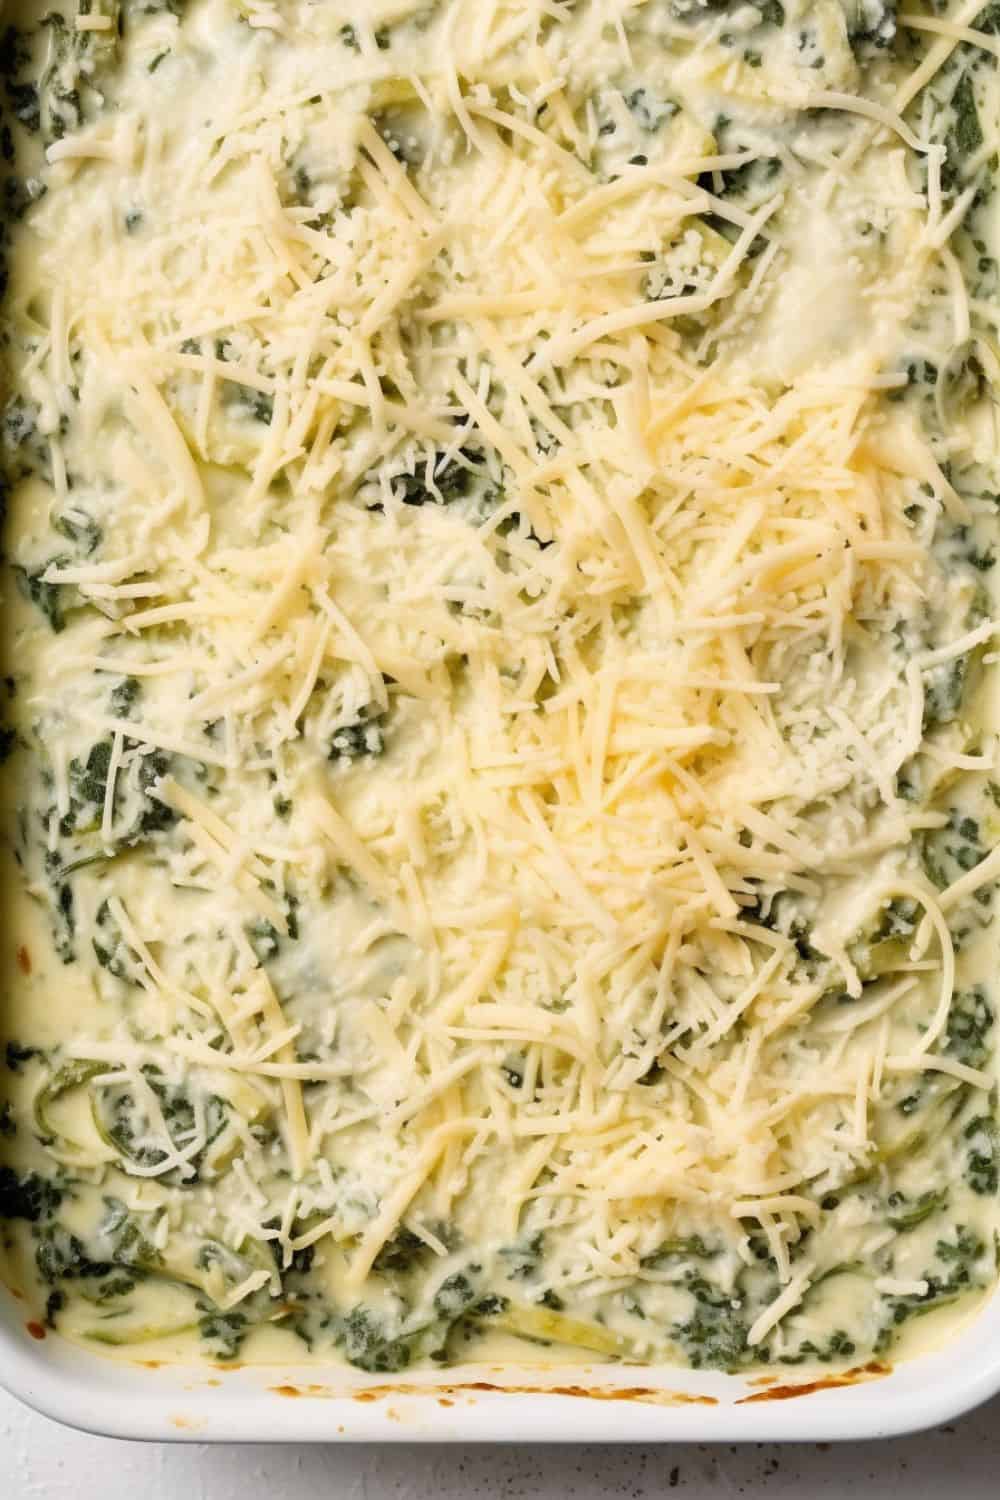 Spinach gratin mixture in a baking dish.